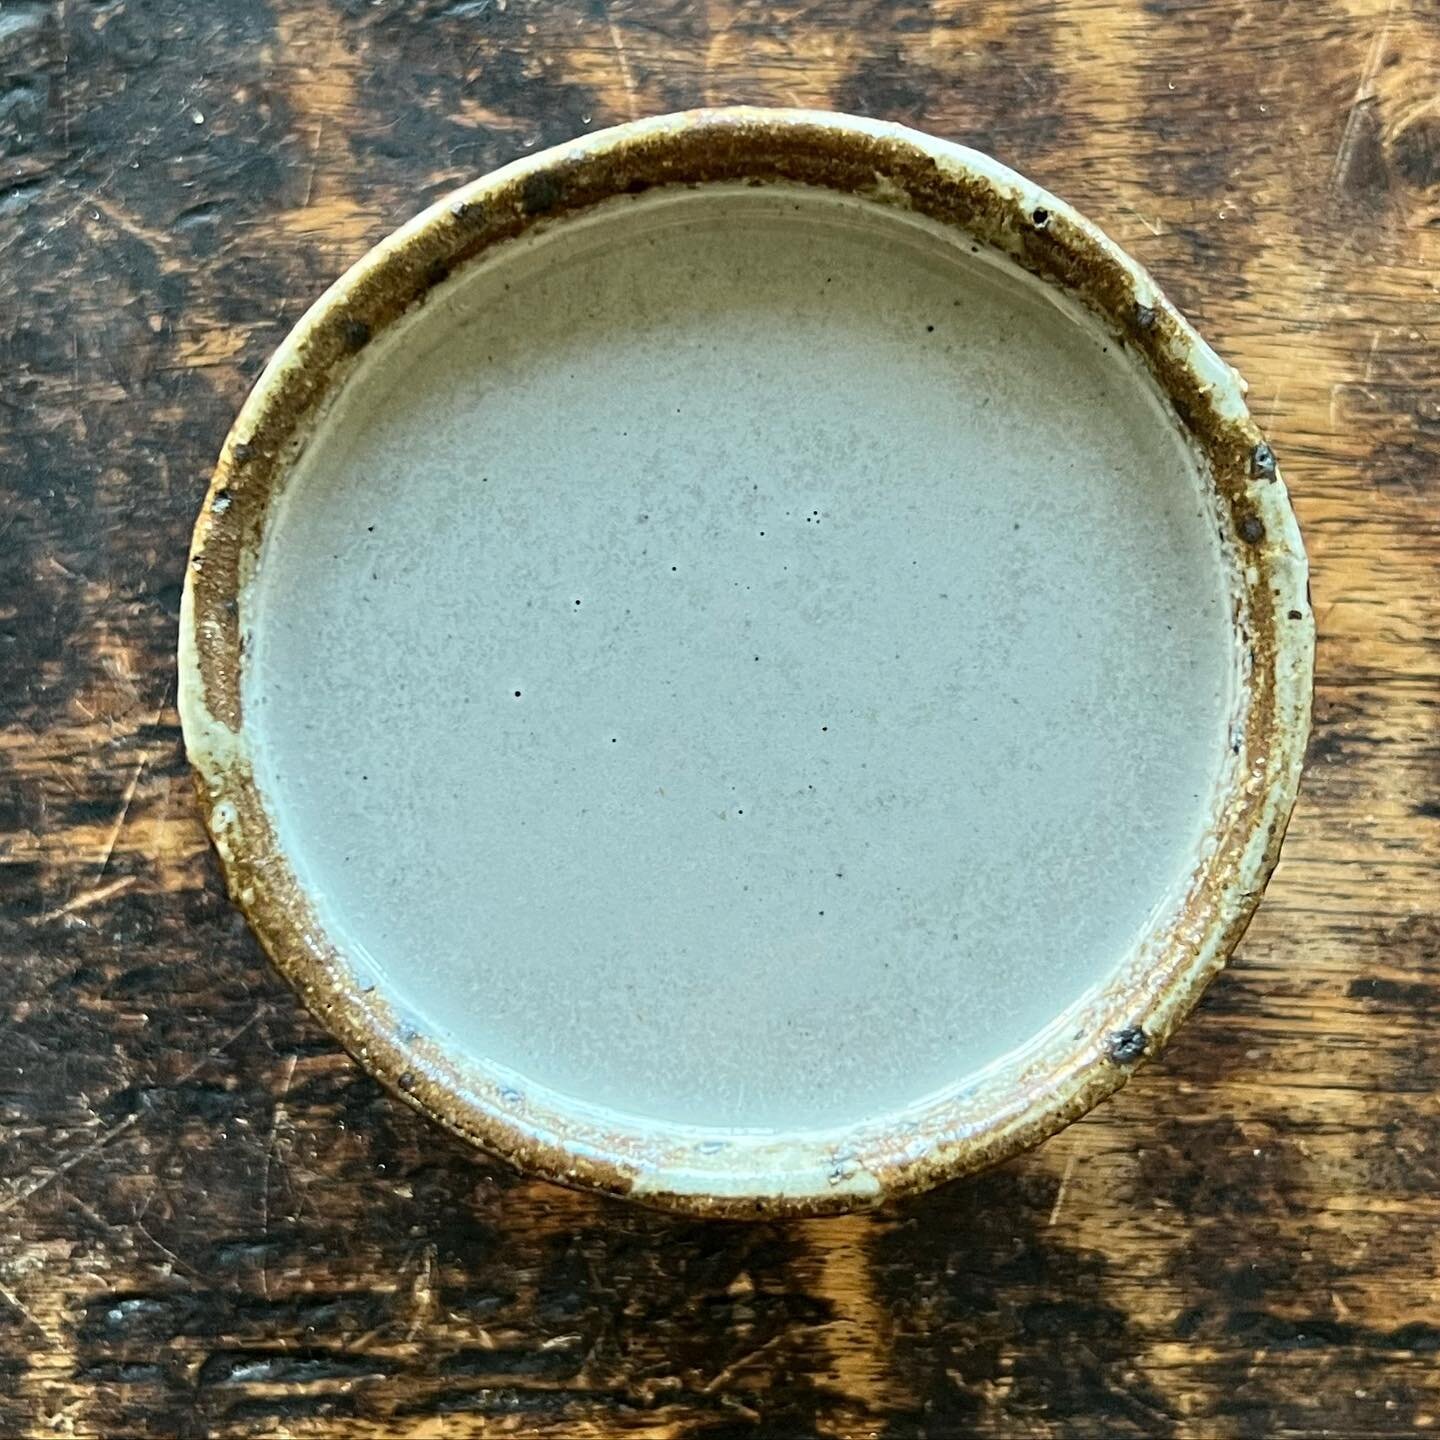 Yummy Black Sesame Milk

Lots of minerals and nutrients for glowing skin, shiny hair, strong bones, immunity

Lightly toast 1 C black sesame seeds in skillet
Turn off heat and let cool.
Add 4 C water and let soak for at least 1 hour.
Put into blender